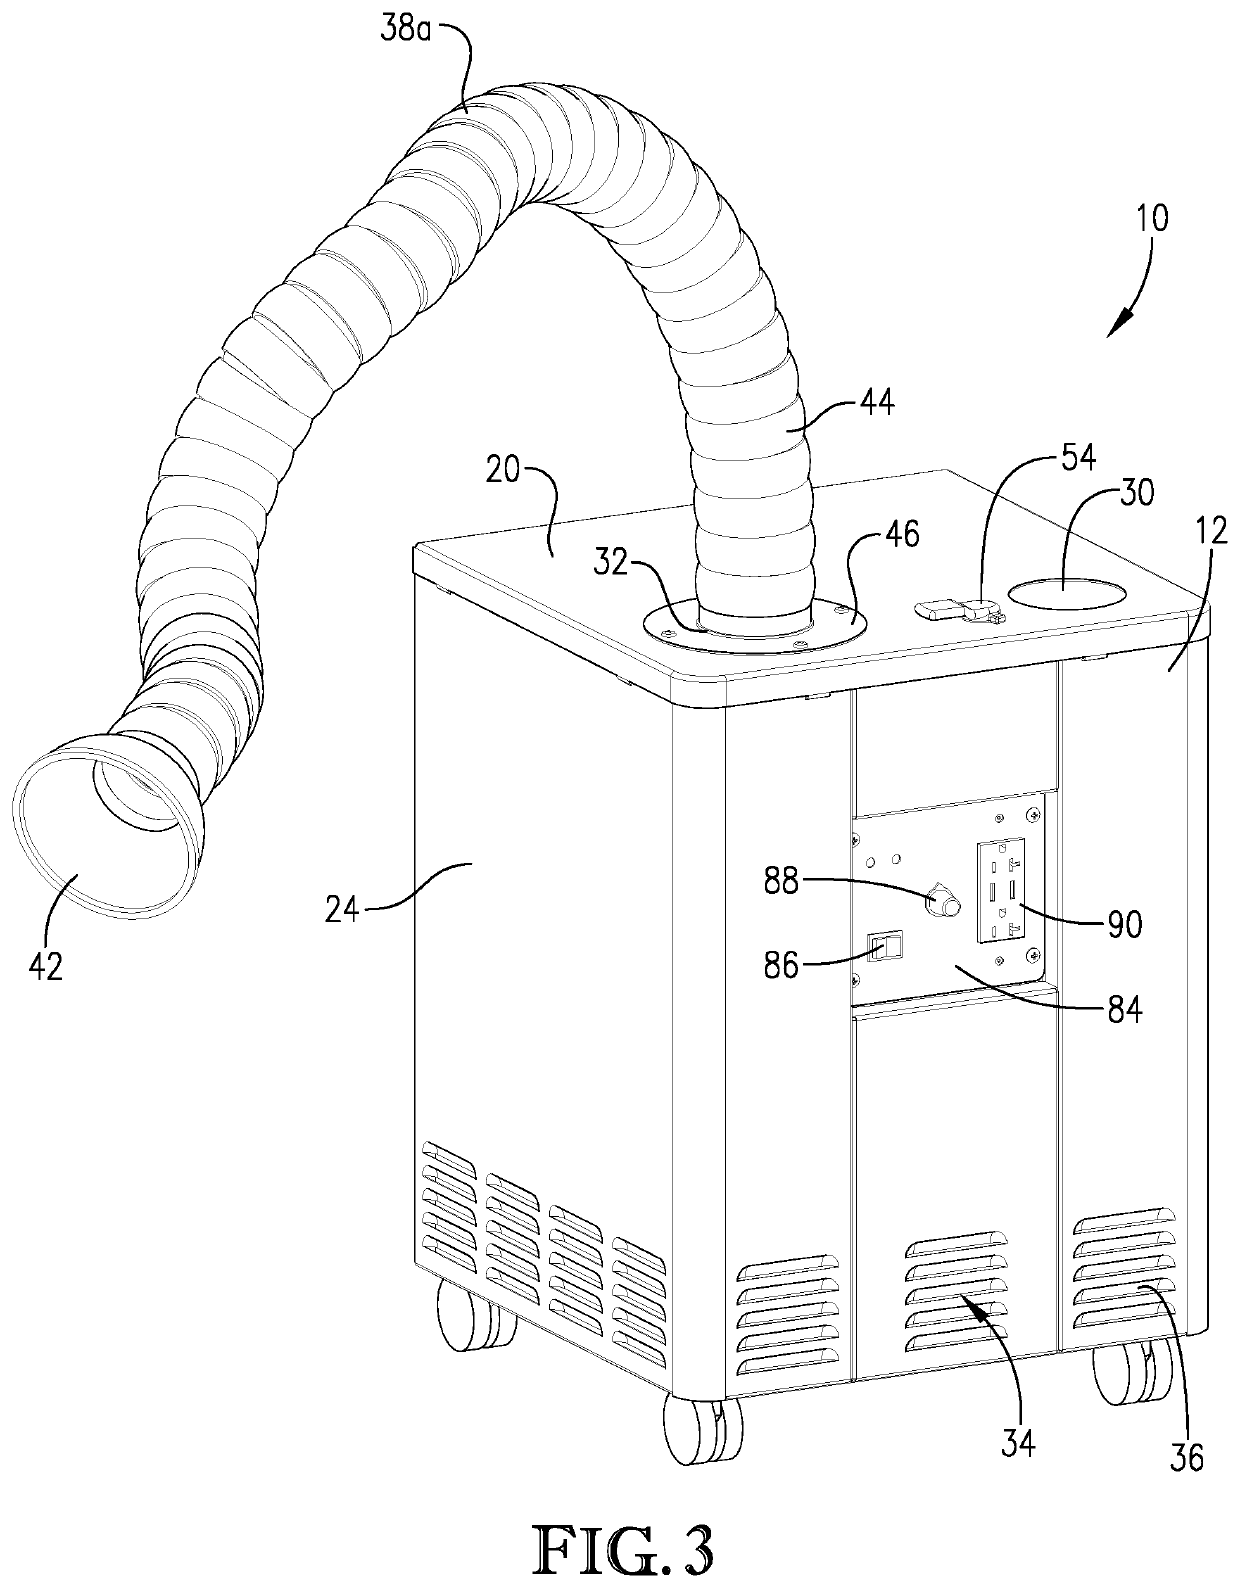 Air purification system